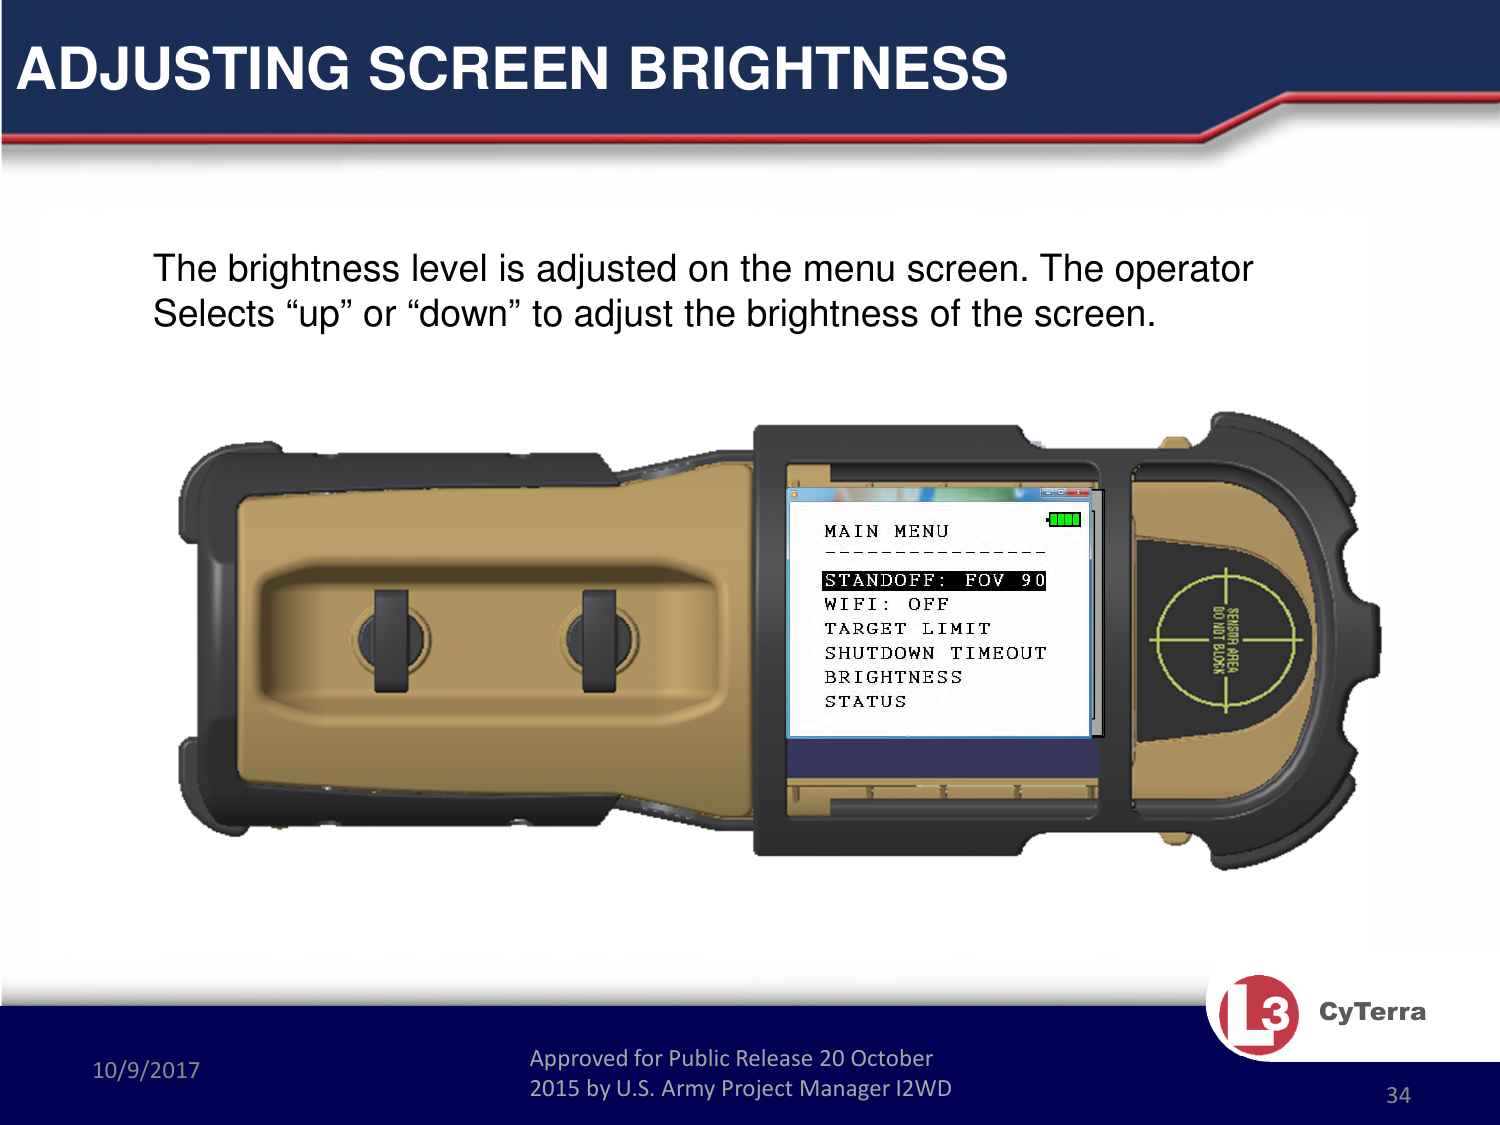 Approved for Public Release 20 October 2015 by U.S. Army Project Manager I2WD10/9/2017 Approved for Public Release 20 October 2015 by U.S. Army Project Manager I2WD 34CyTerraADJUSTING SCREEN BRIGHTNESSThe brightness level is adjusted on the menu screen. The operatorSelects “up” or “down” to adjust the brightness of the screen.